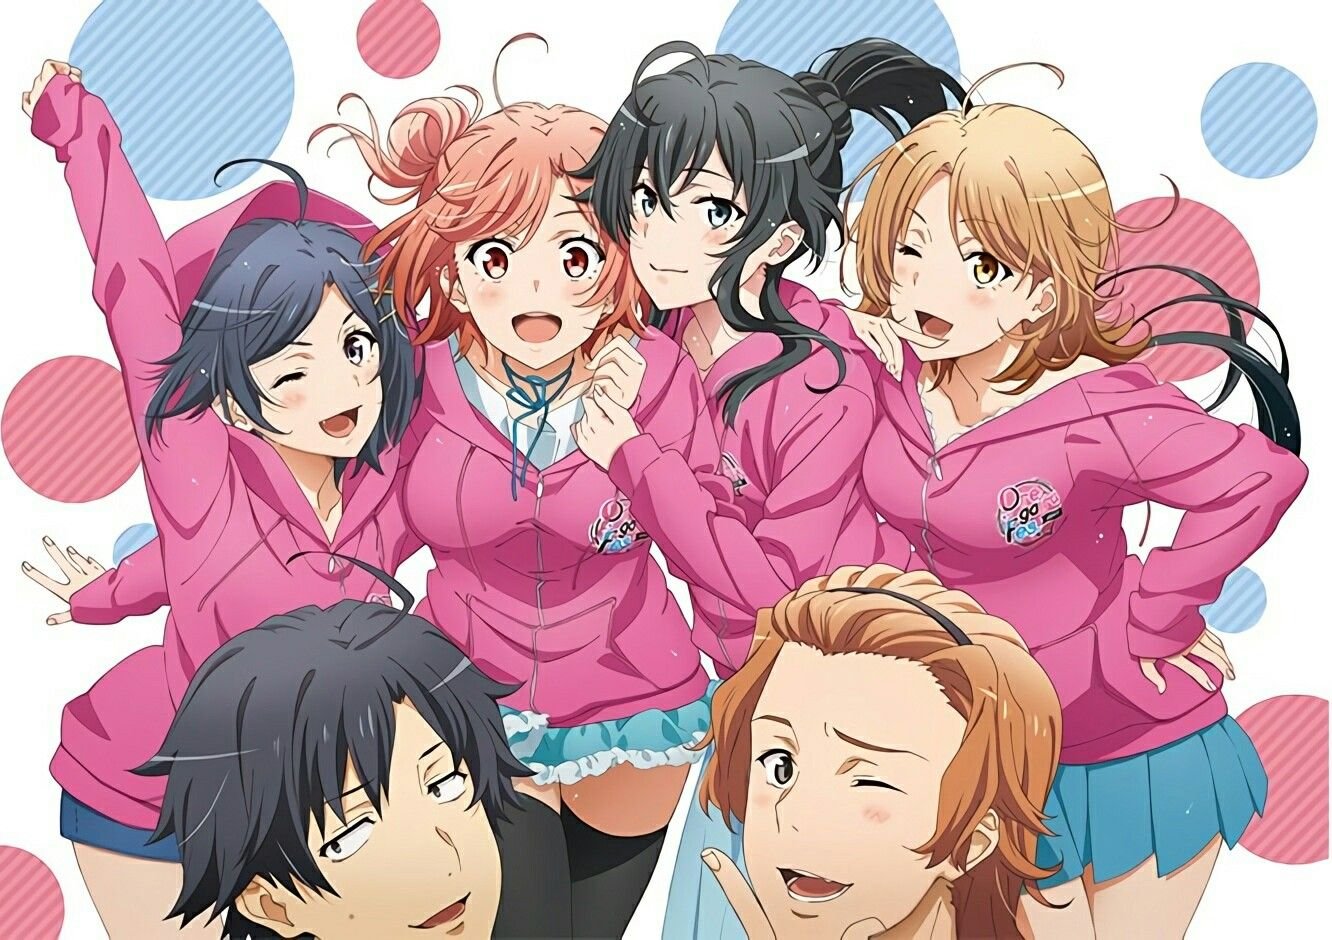 What is the story of Oregairu?